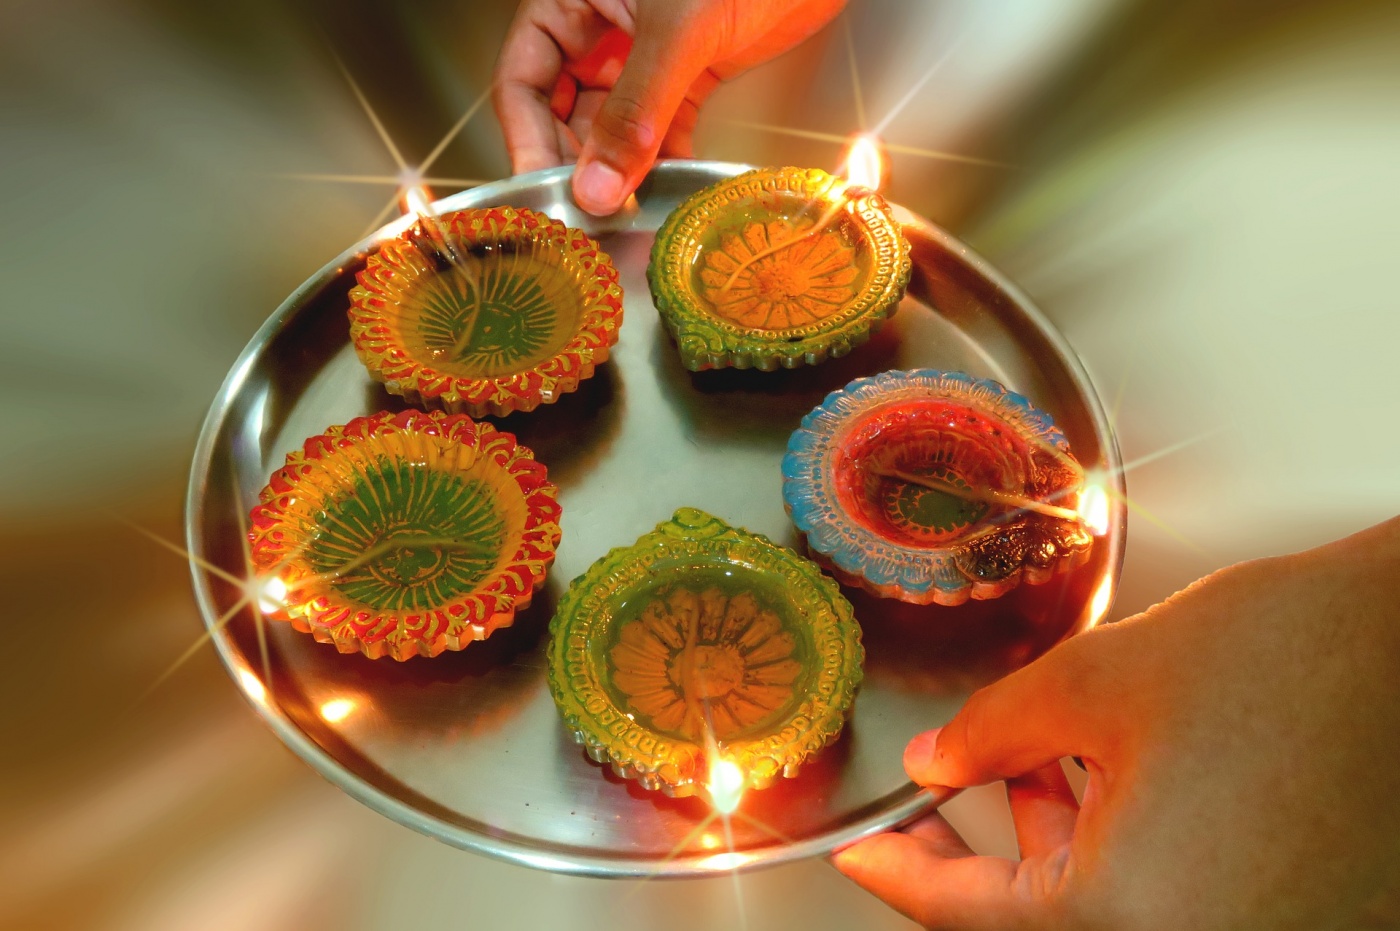 A tray of five diyas (oil lamps)